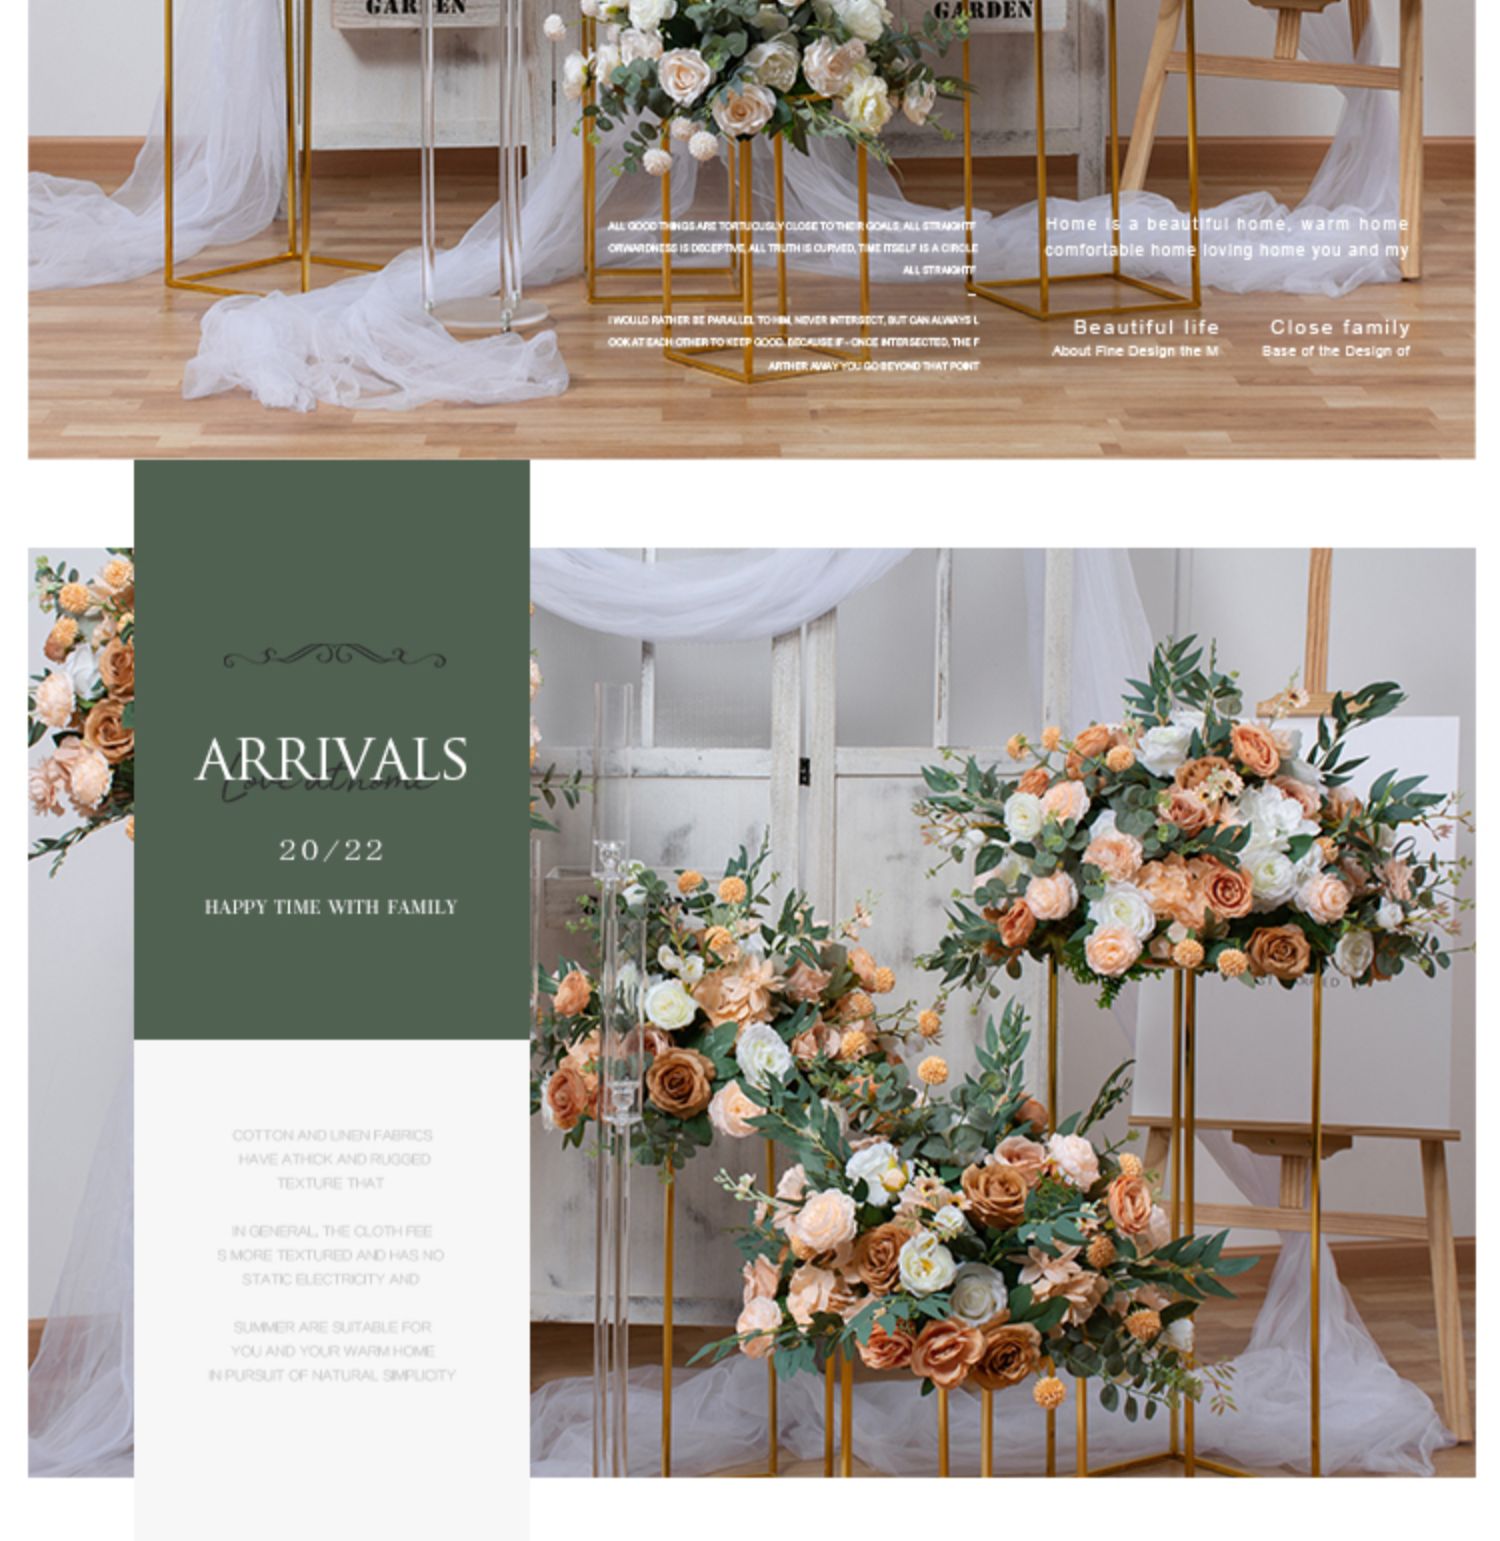 Designing and arranging flowers in a visually appealing pattern